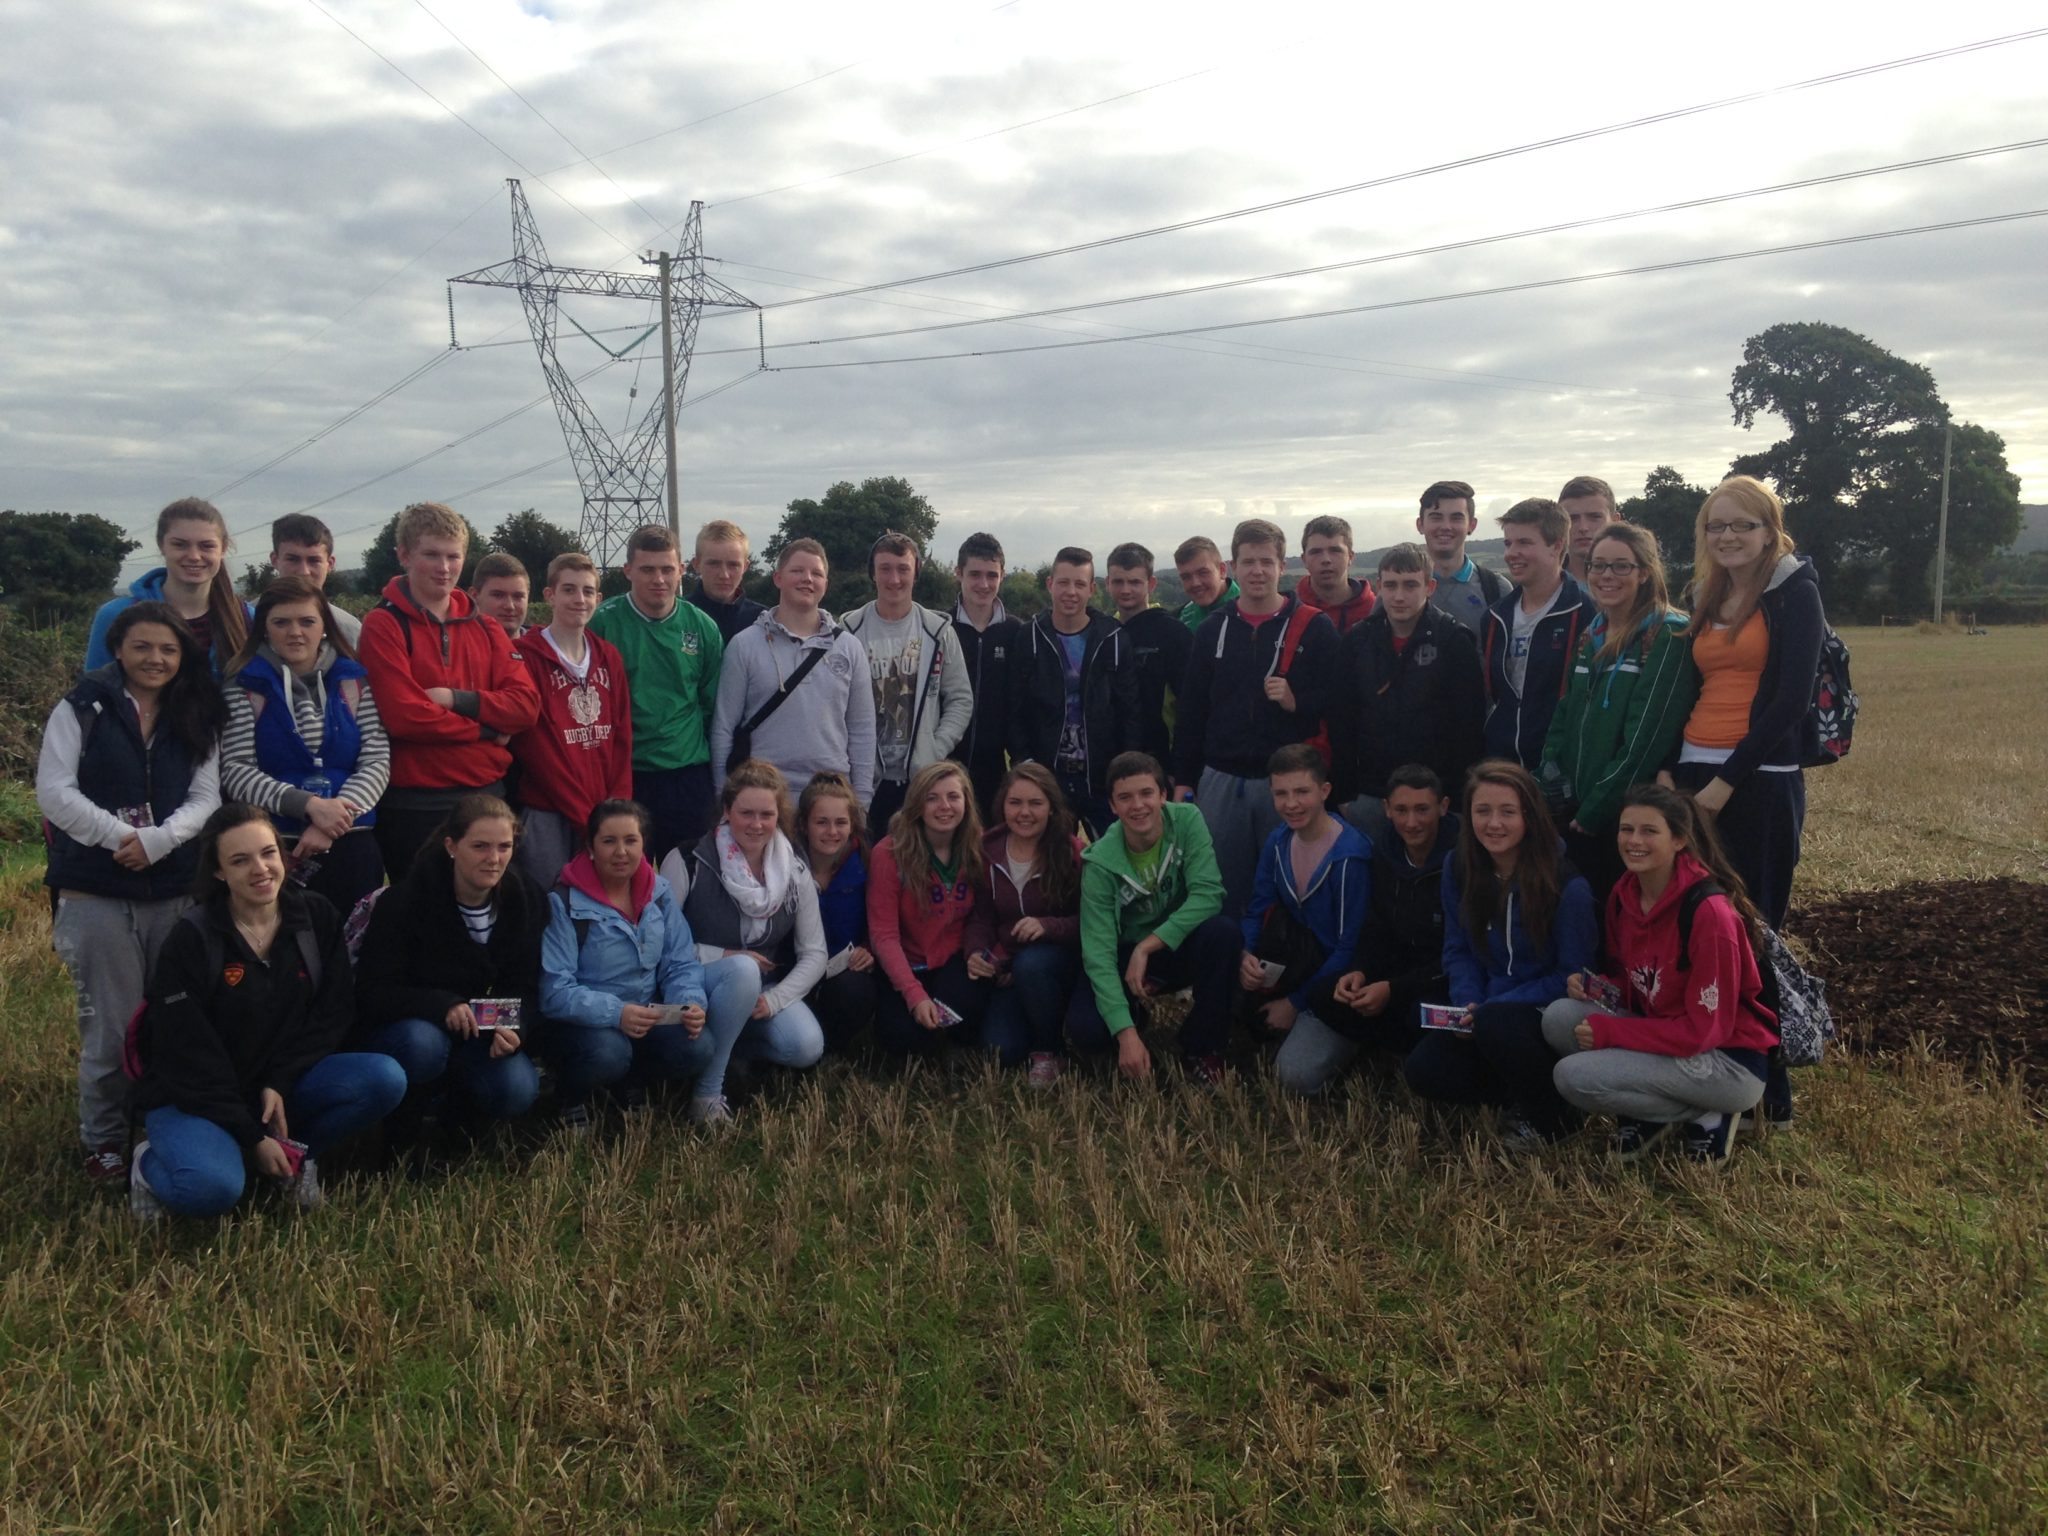 Desmond College Students at the Ploughing Championship 2014